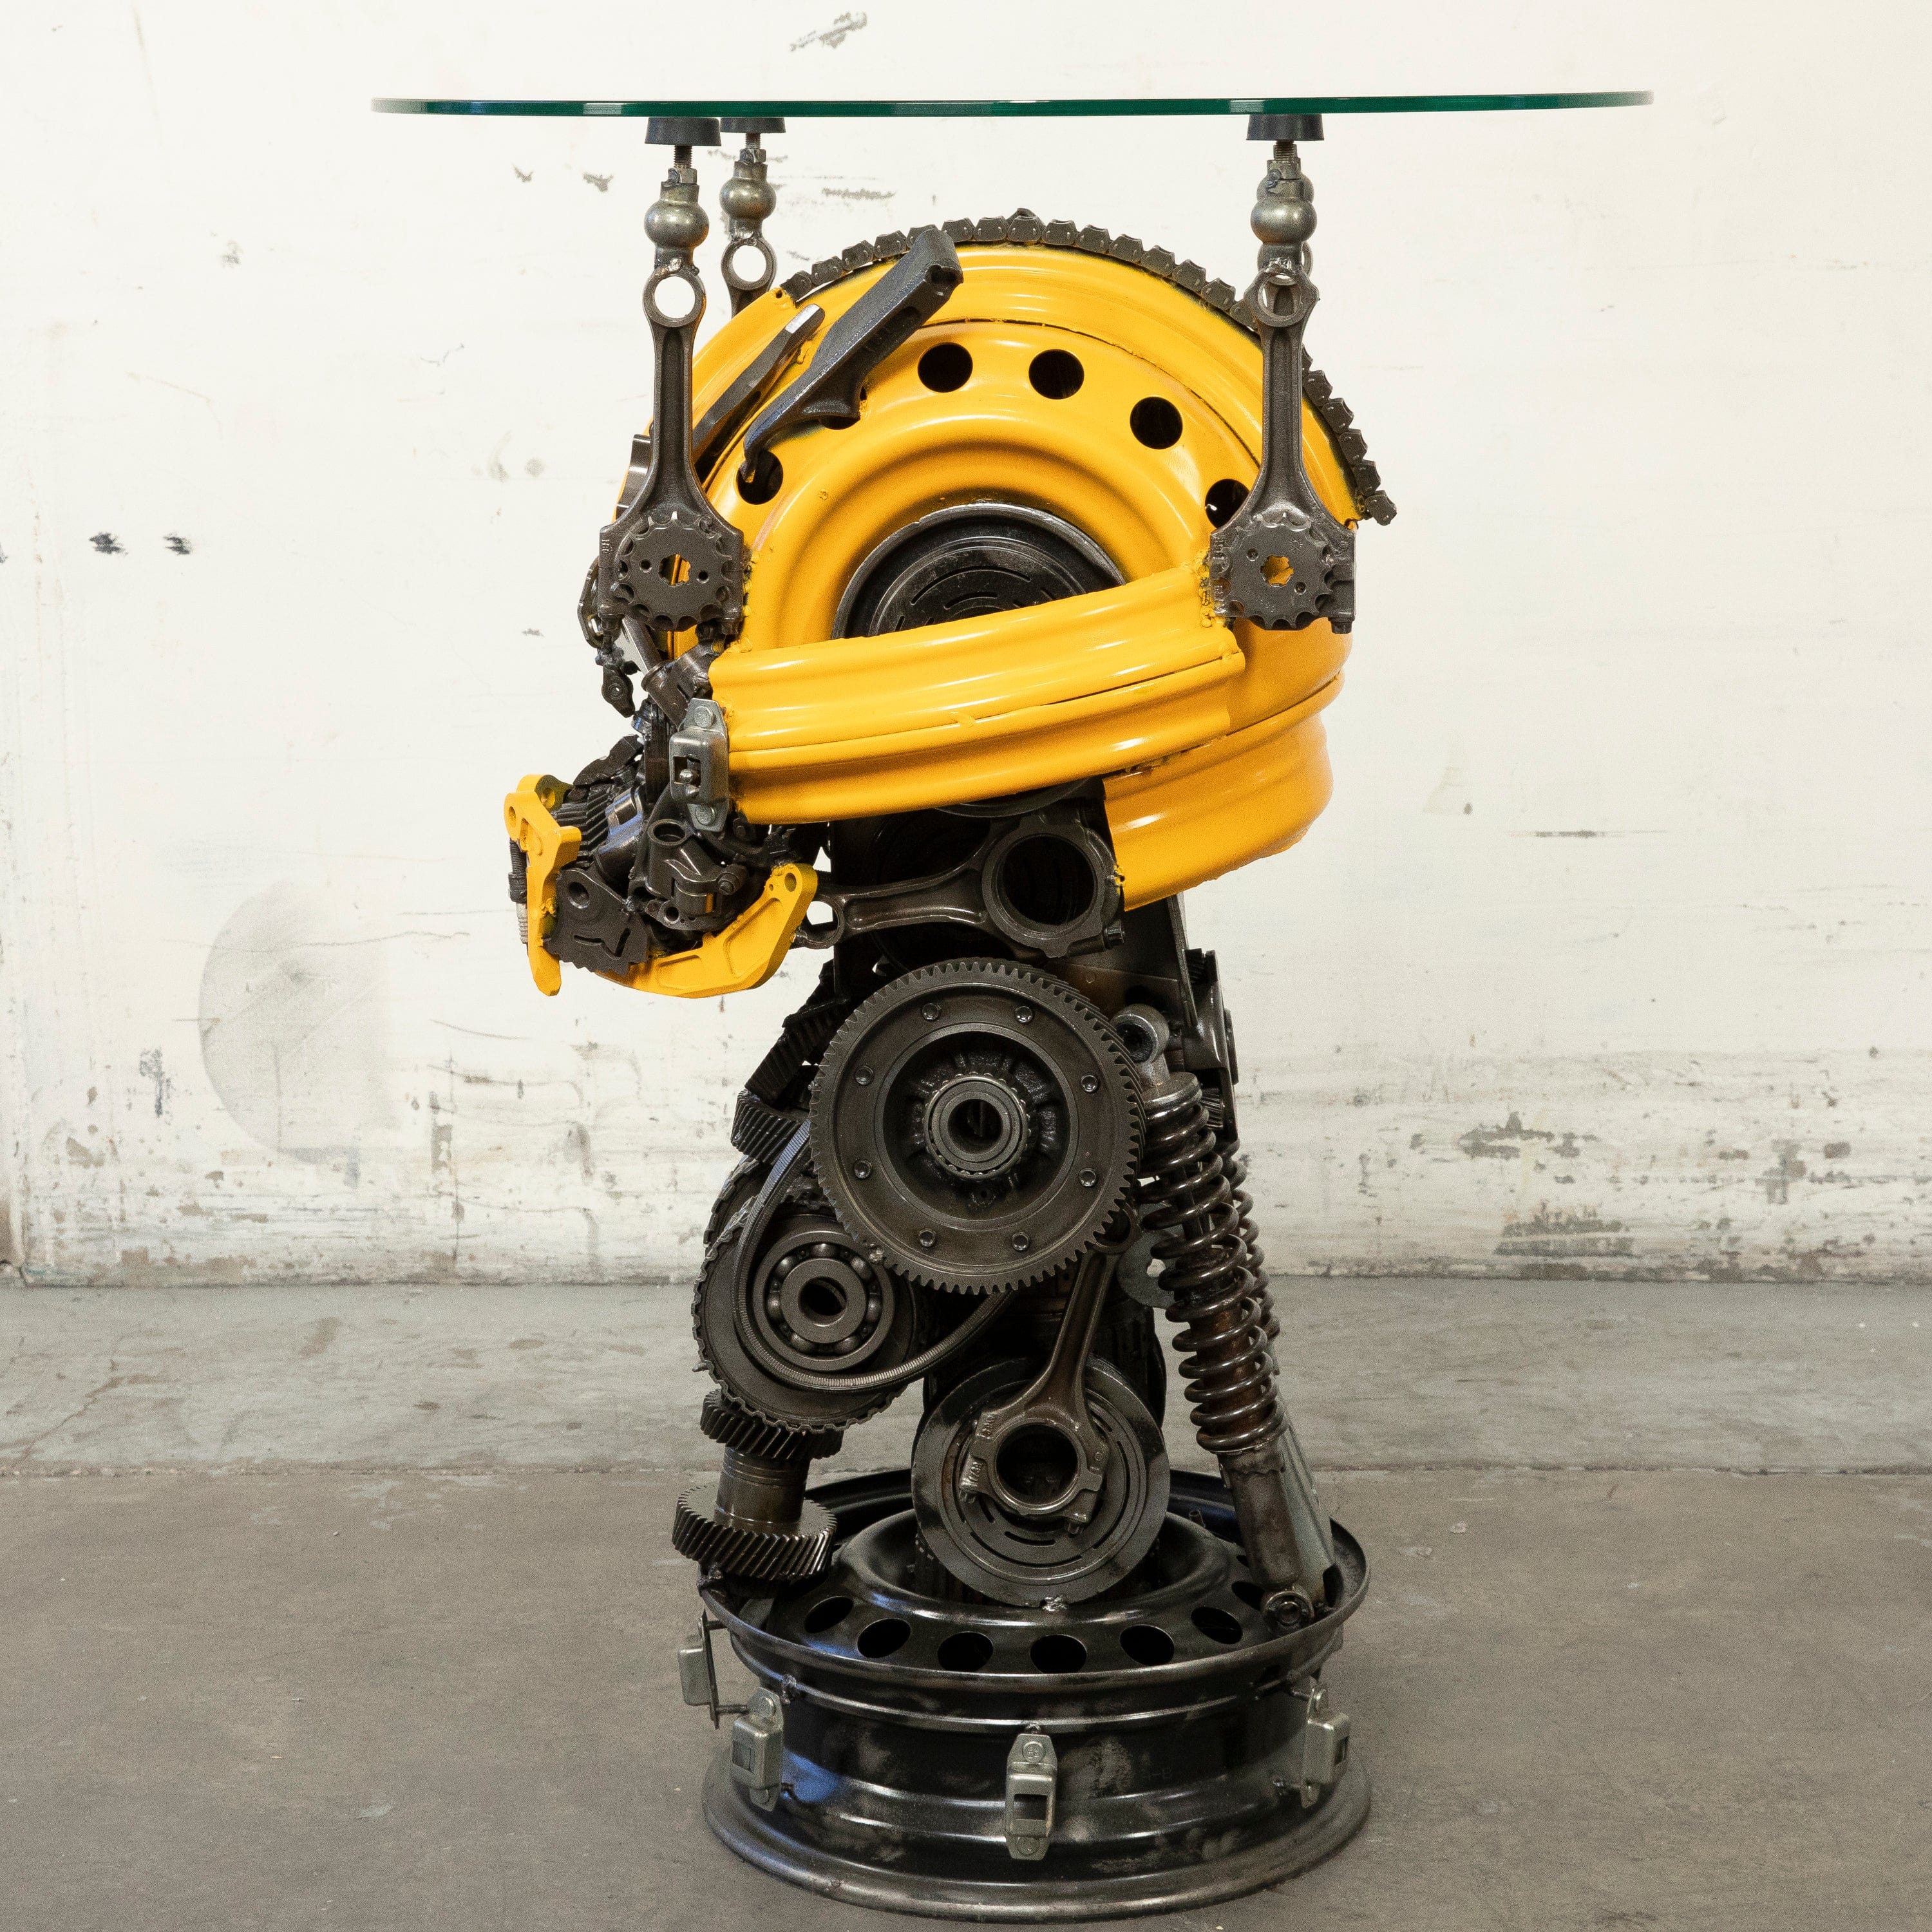 Kalifano Recycled Metal Art 36" Bumblebee Inspired Recycled Metal Sculpture Table RMS-BBTAB90-S03